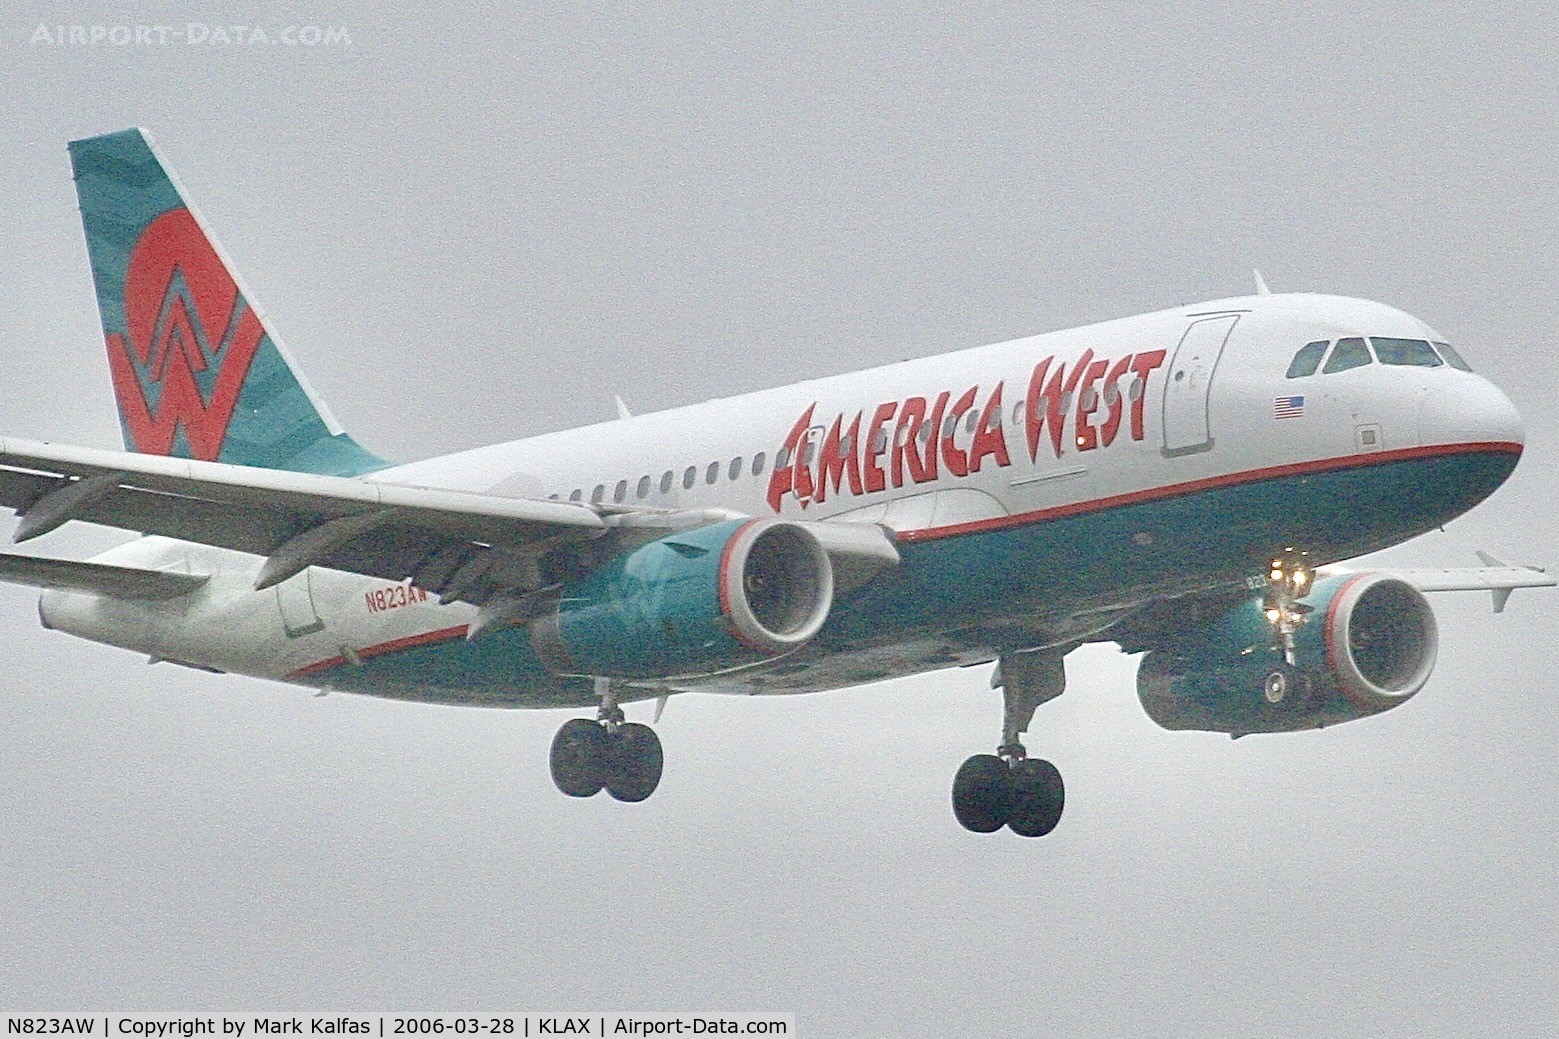 N823AW, 2001 Airbus A319-132 C/N 1463, America West Airbus A319-132, N823AW on a stormy approach 7R LAX.